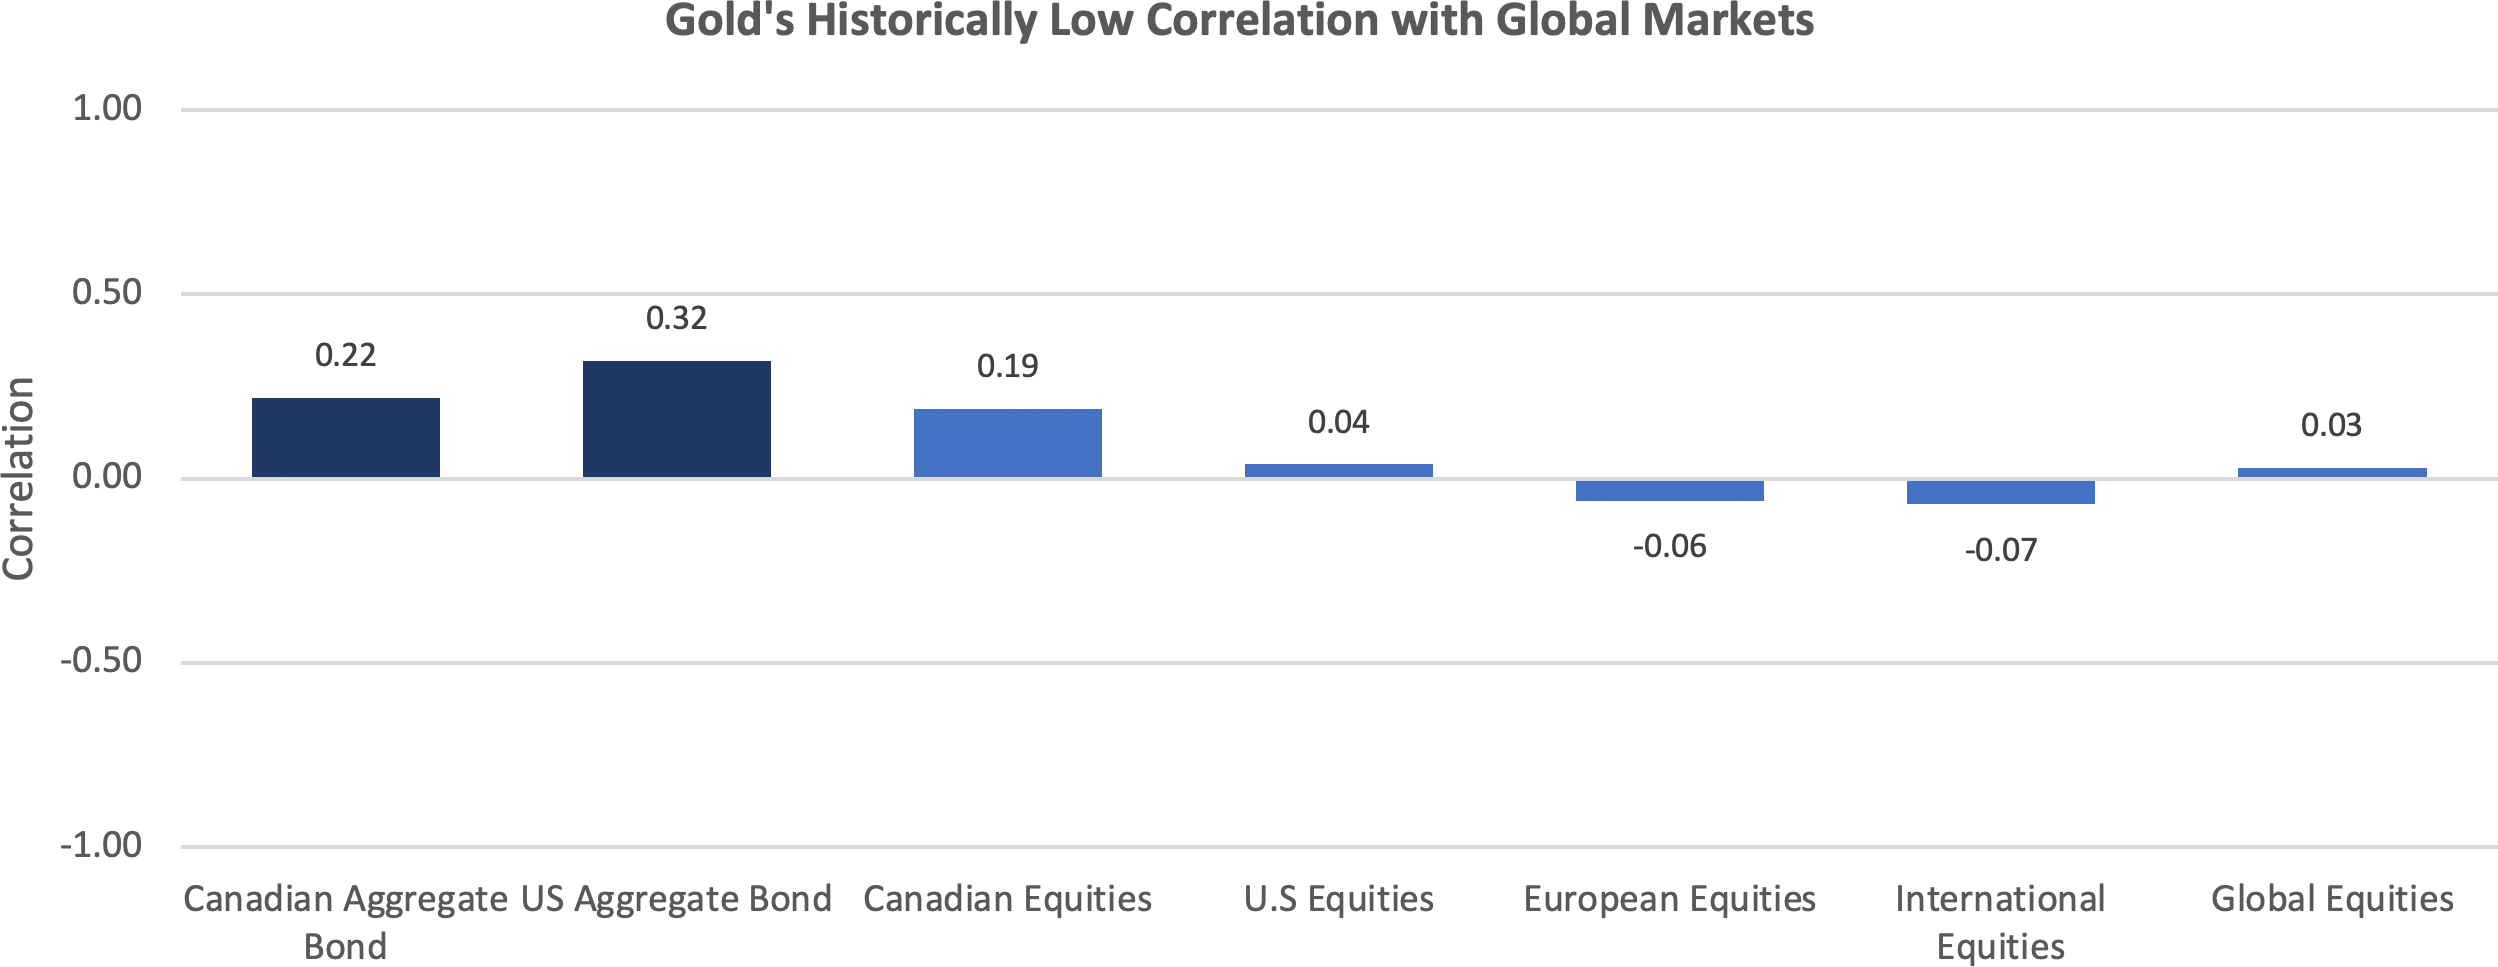 Gold's Historically Low Correlation with Equity and Bond Markets